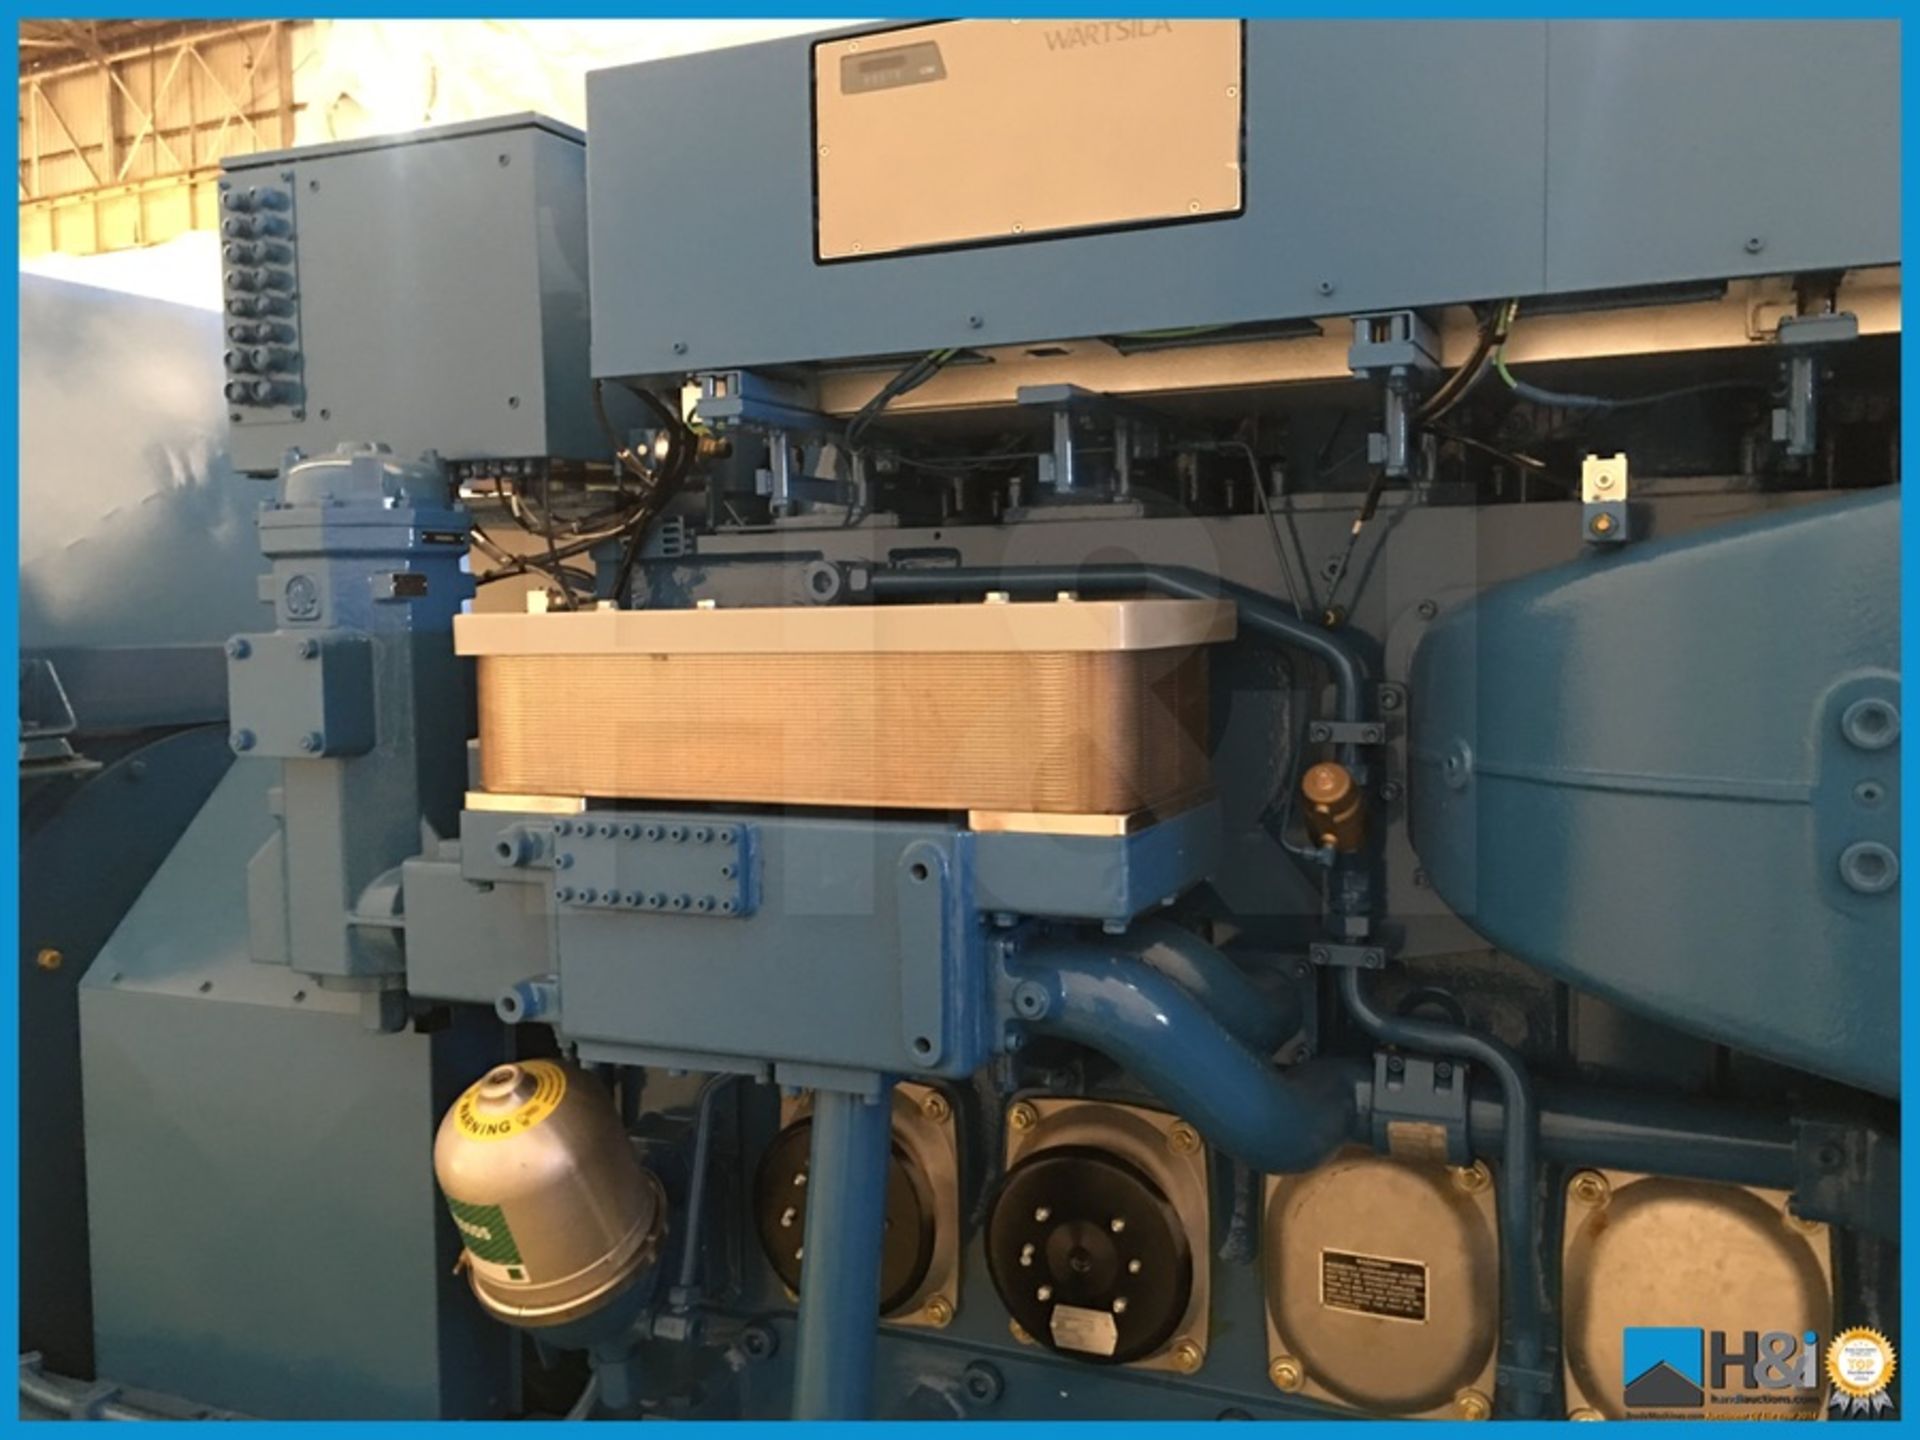 Unused Wartsila 6L20 high capacity diesel generator manufactured in 2013 for a large marine - Image 11 of 22